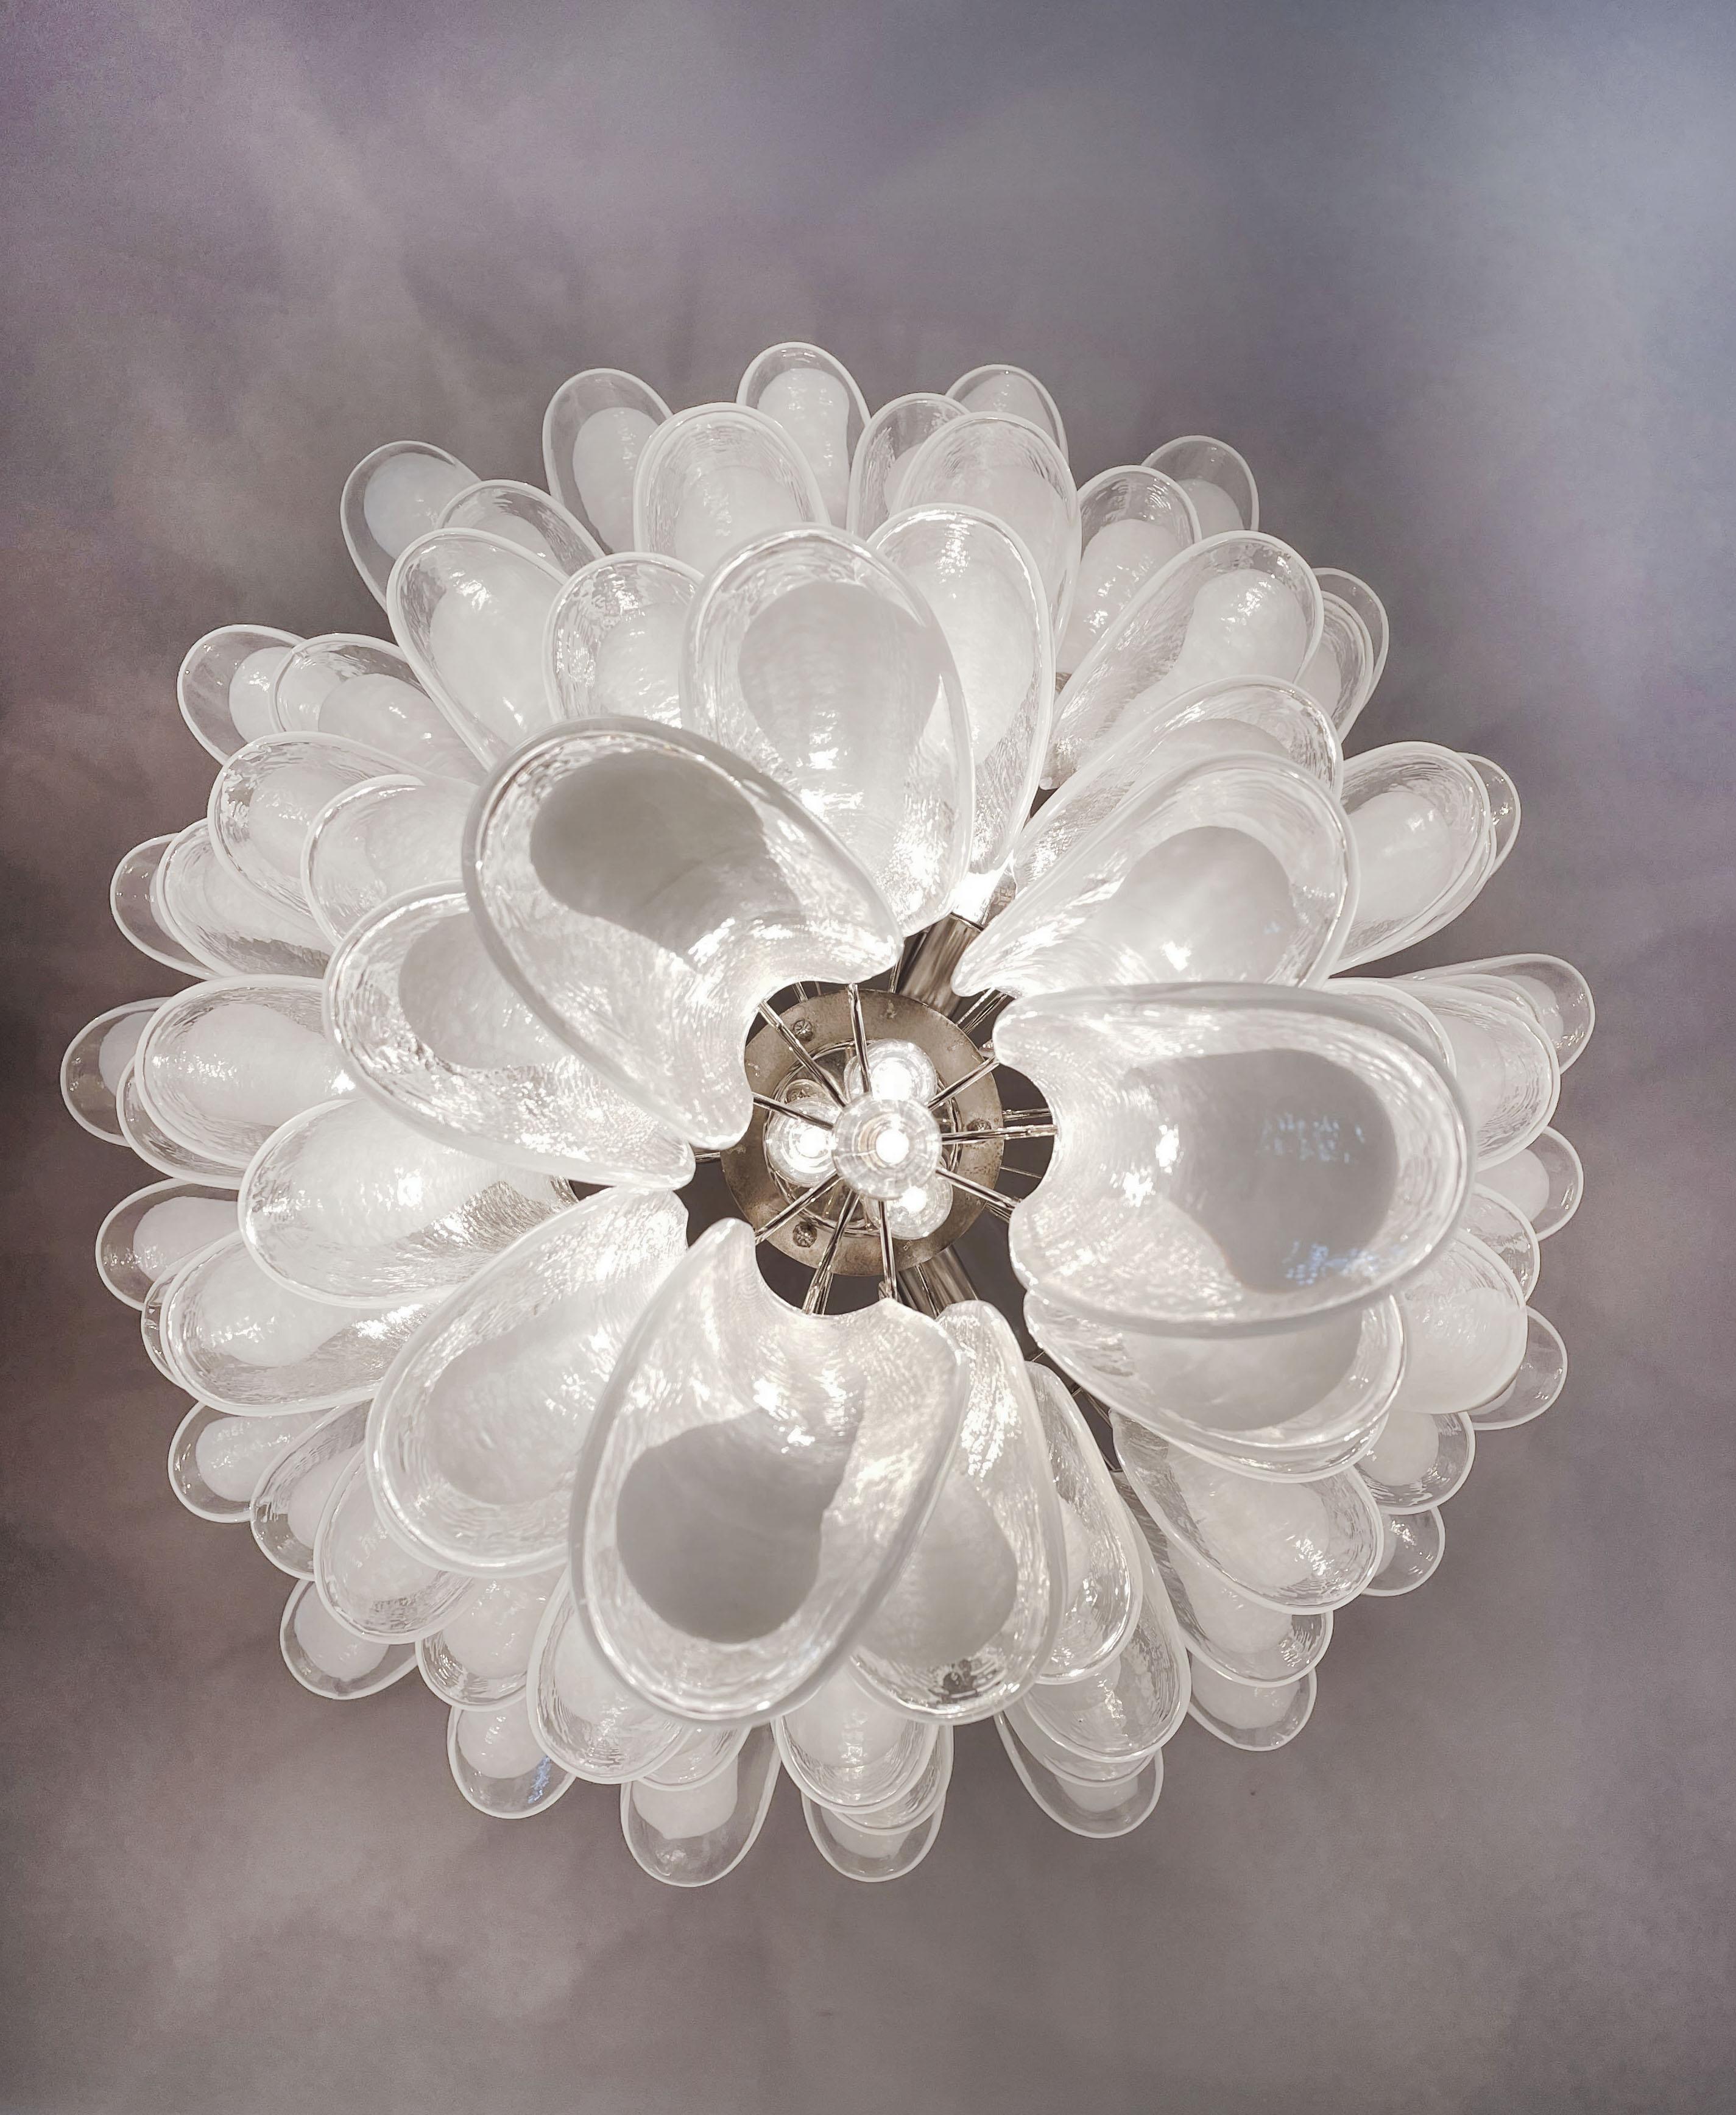 Italian vintage Murano chandelier in the manner of Mazzega - 75 glass petals For Sale 9